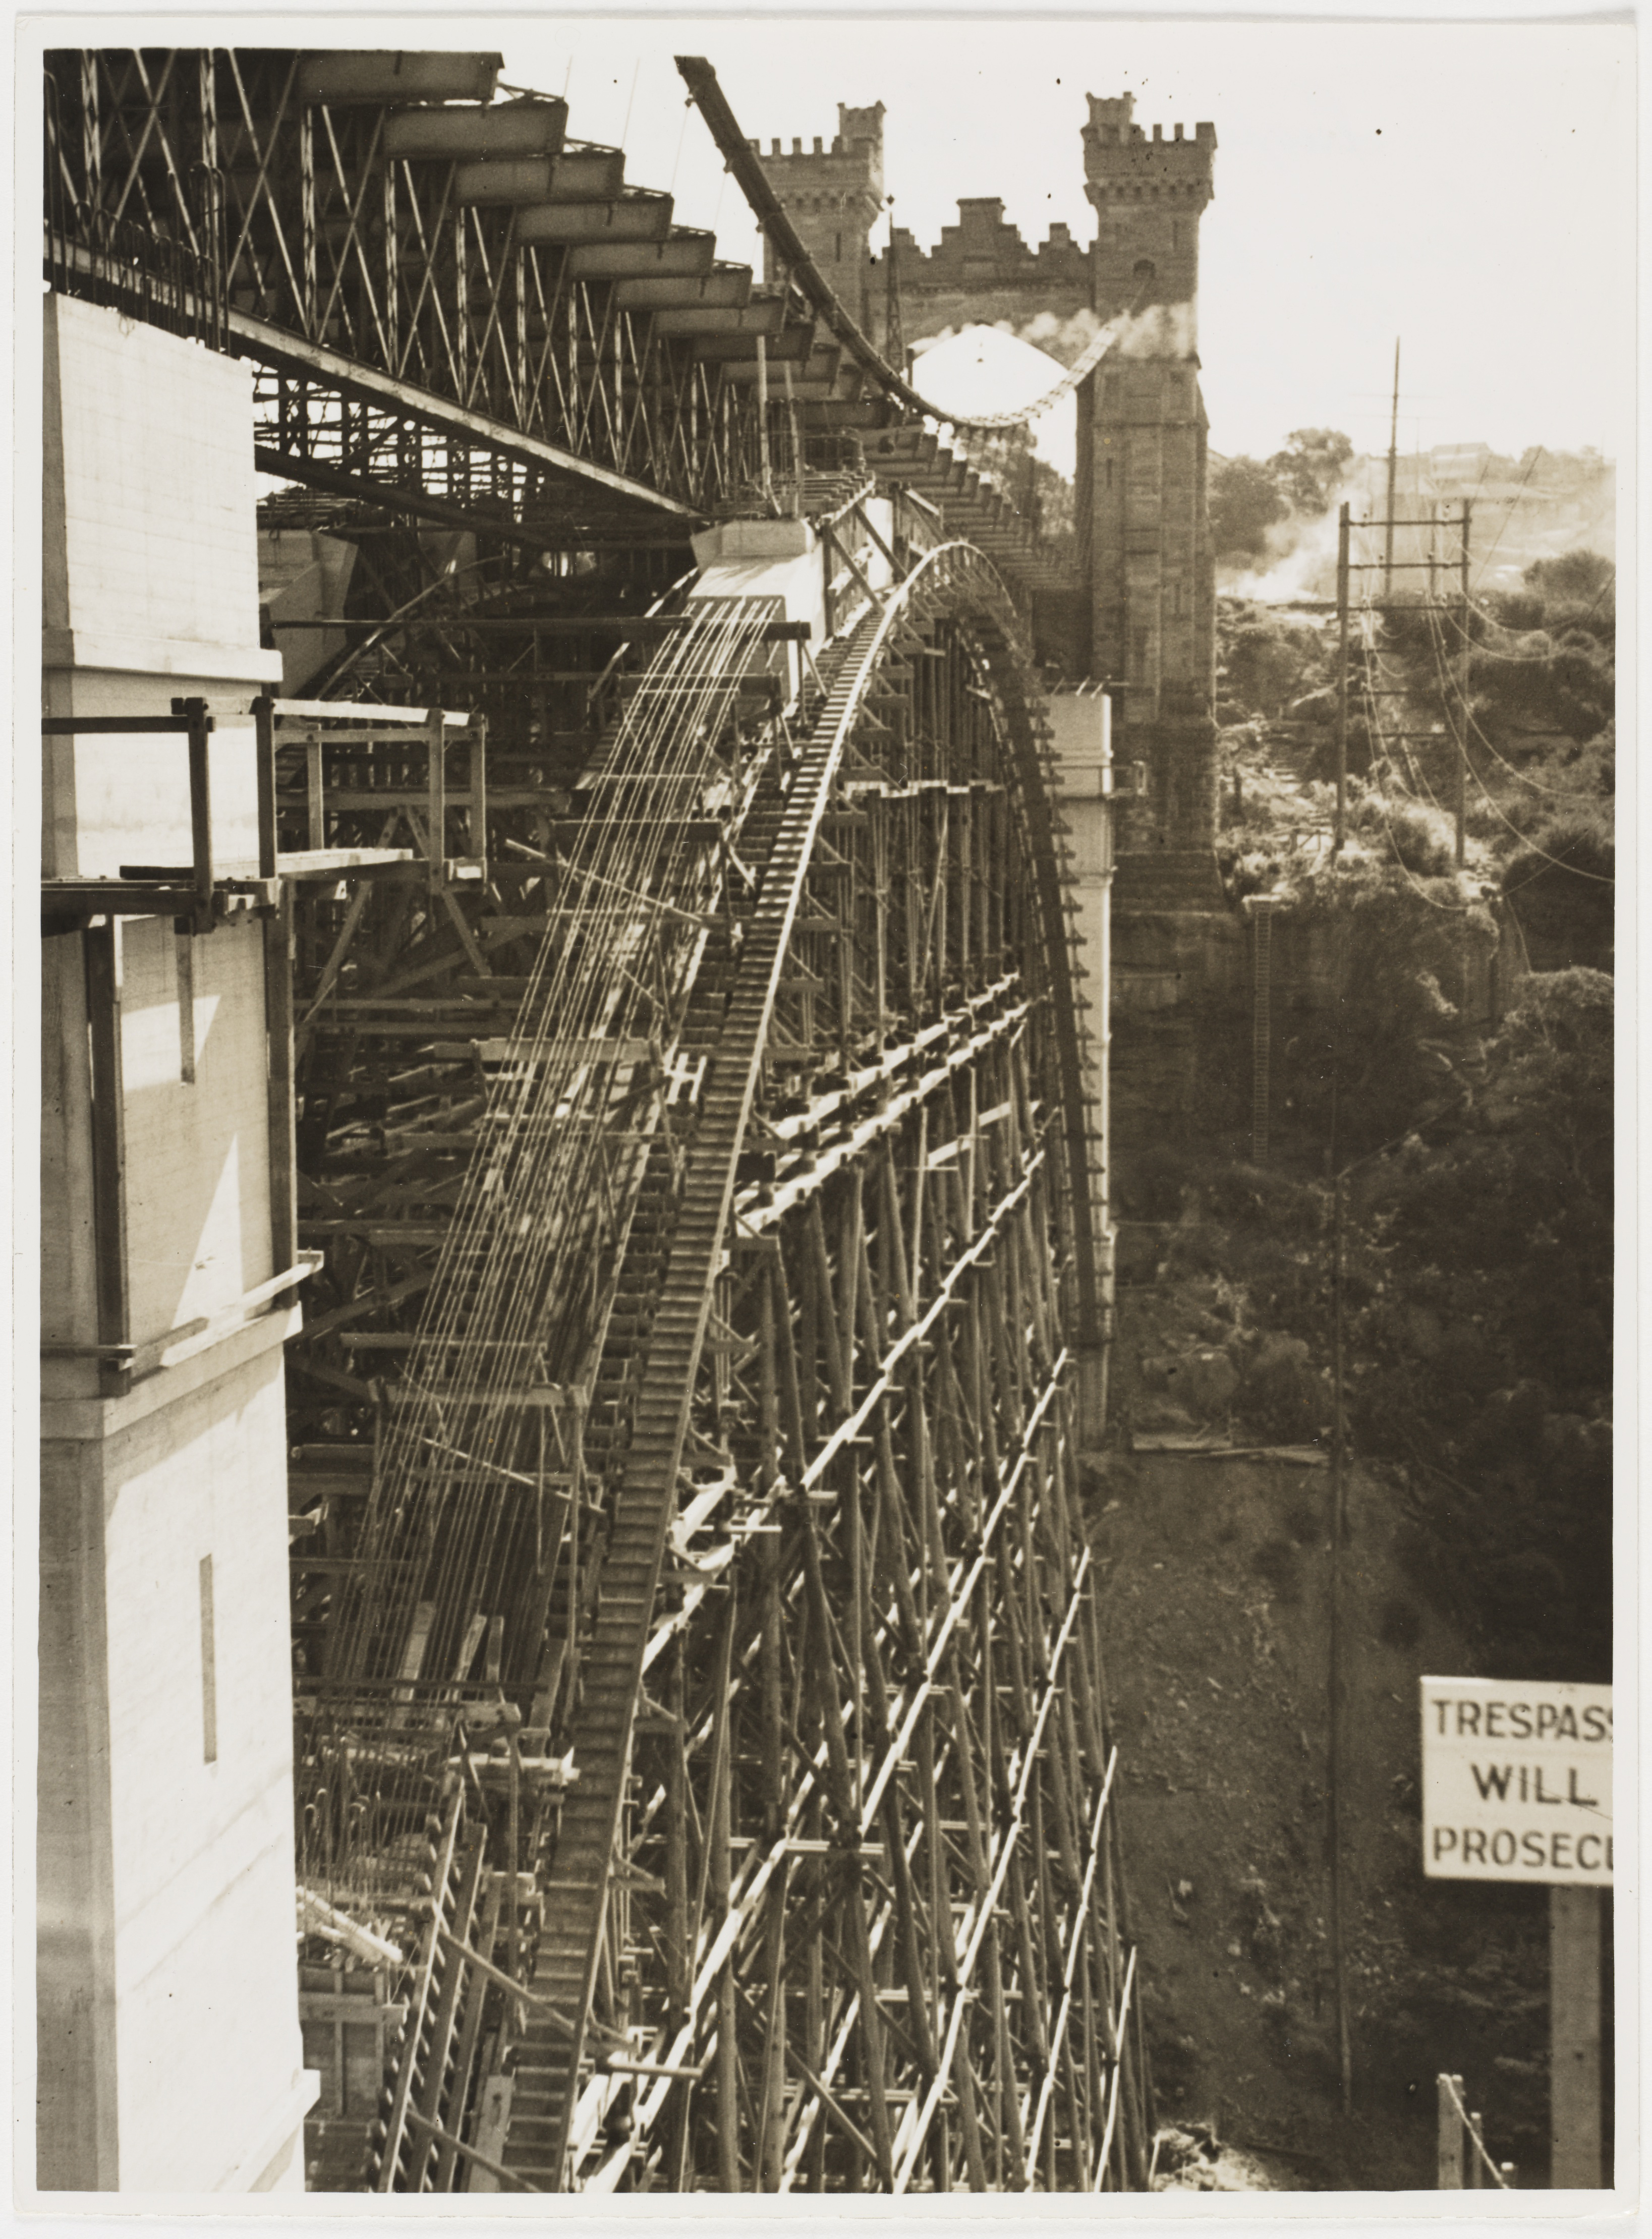 Northbridge Suspension Bridge being converted to cantilever construction, North Sydney, ca. 1938, Ted Hood